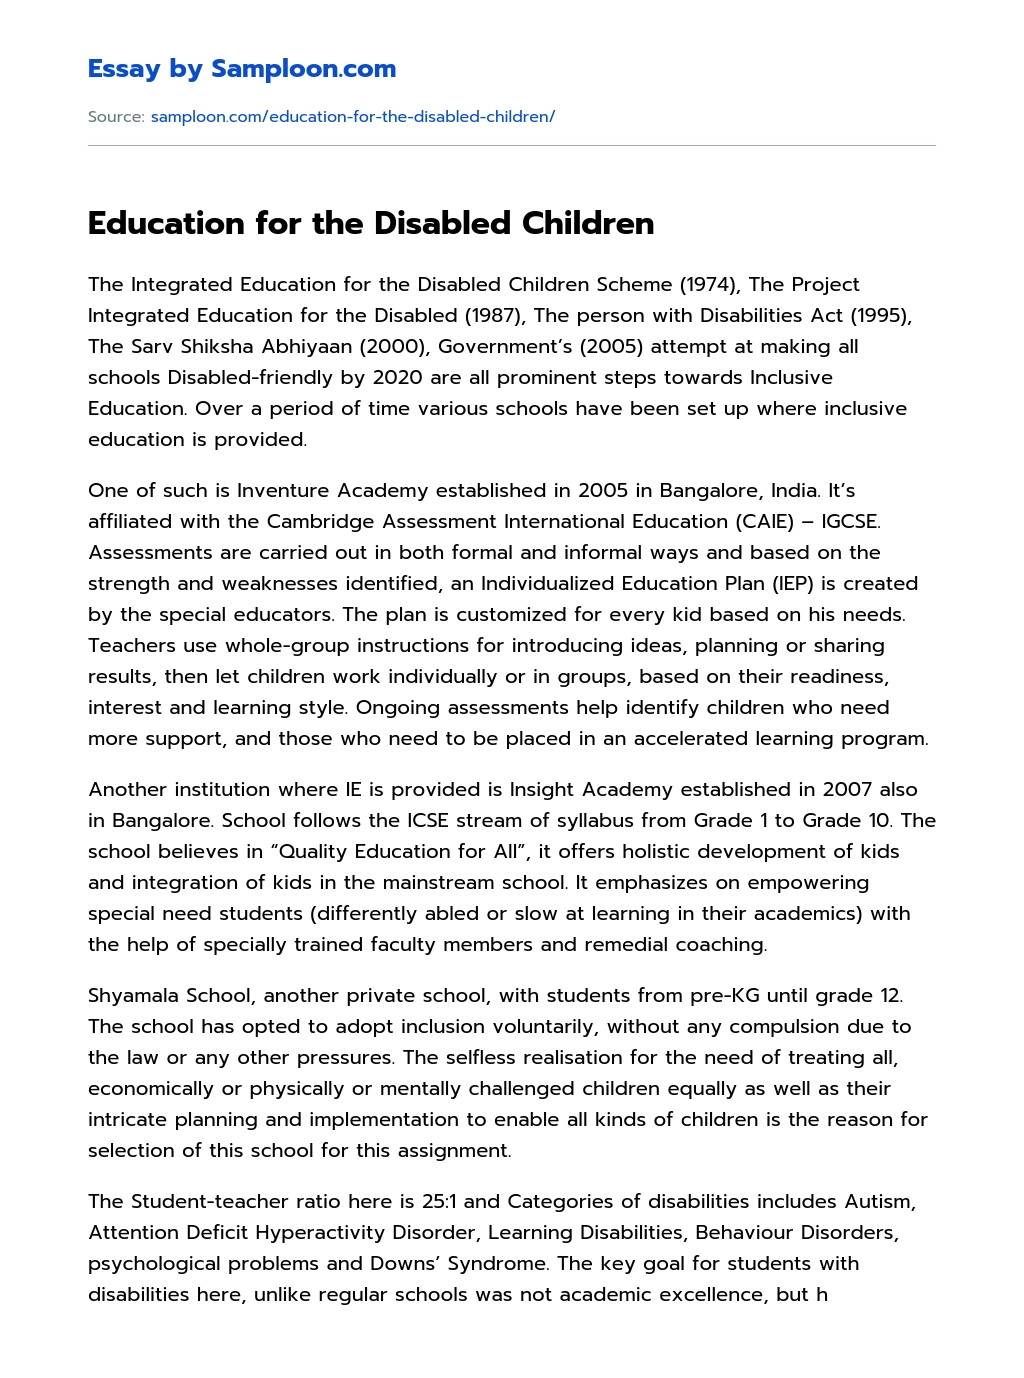 Education for the Disabled Children essay